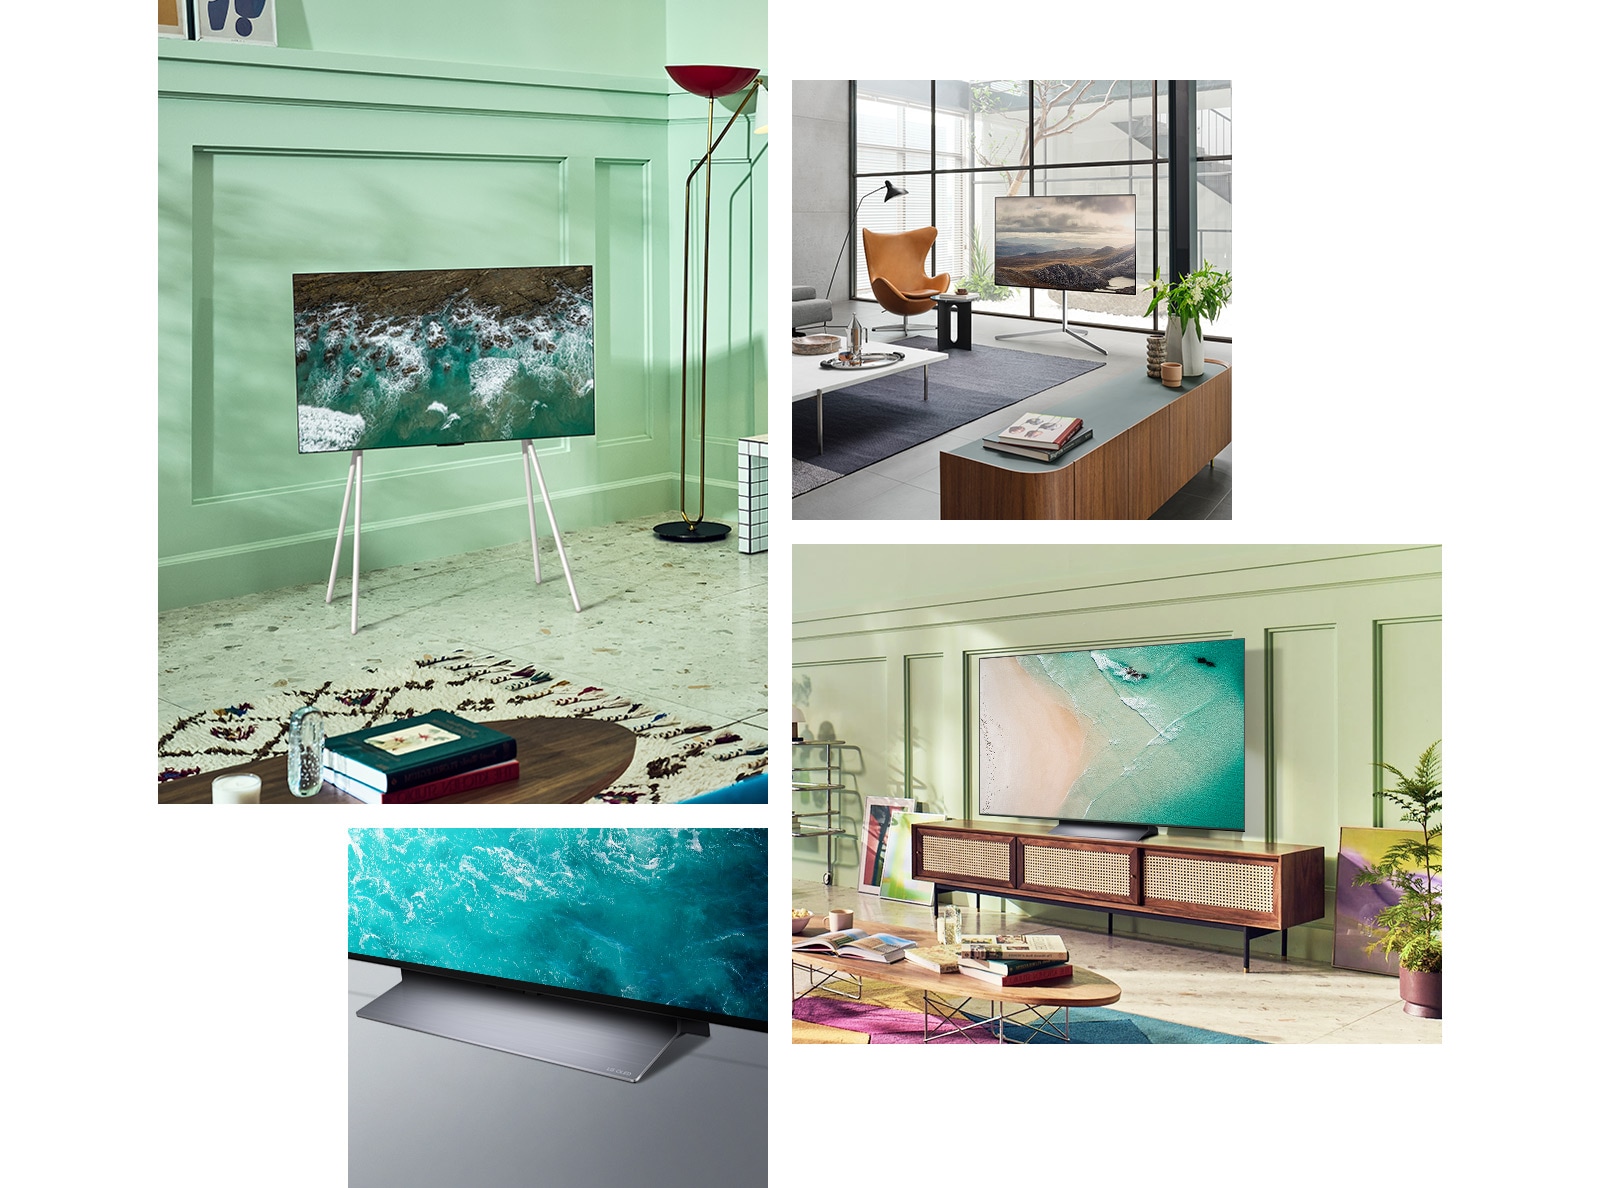 An LG OLED C2 with Floor Stand is in the corner of a mint-colored room. An LG OLED C2 with Gallery Stand sits in front of a large window in a modern room. An LG OLED C2 sits on a vintage TV cabinet in a lime green room with colorful art and furnishings. A close-up angled view of LG OLED C2's base.